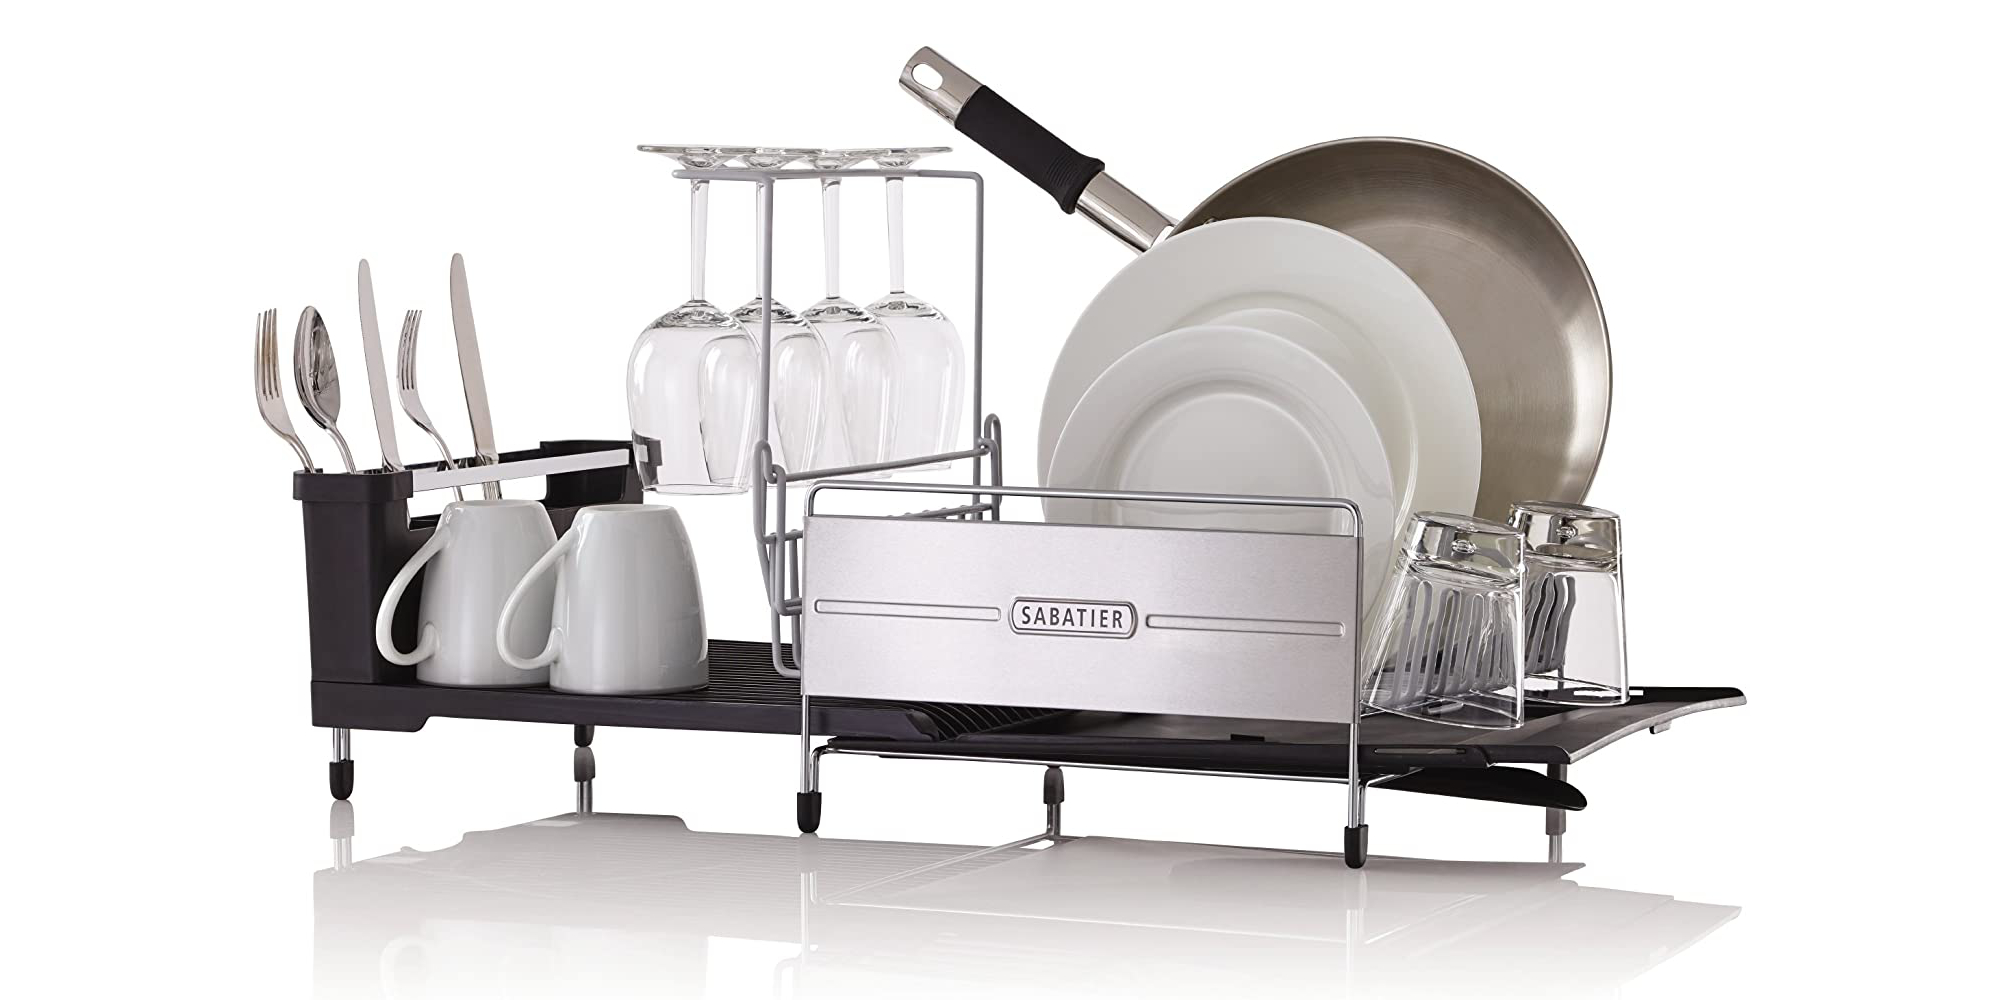 https://9to5toys.com/wp-content/uploads/sites/5/2020/04/Sabatier-Expandable-Stainless-Steel-Dish-Rack.jpg